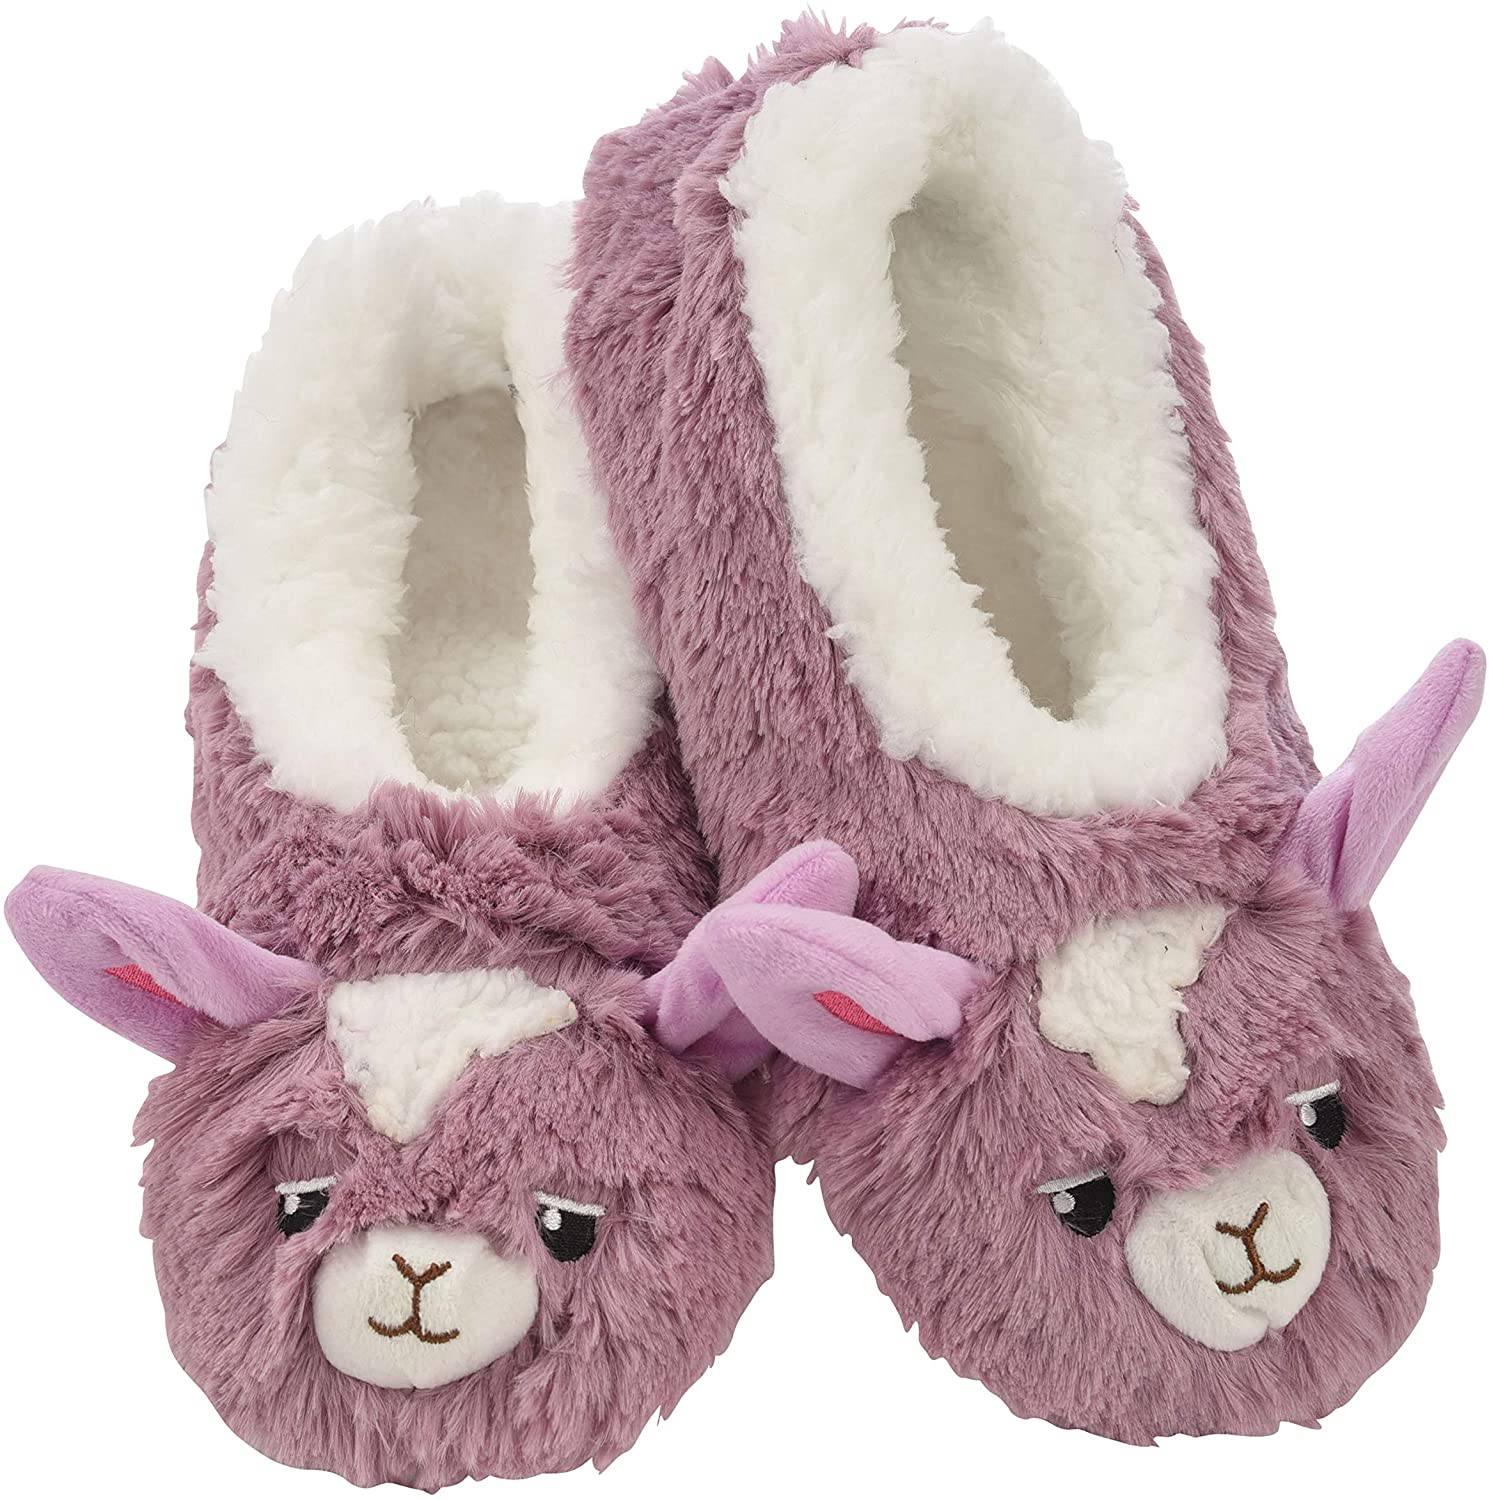 Kids Furry Foot Pals Slippers